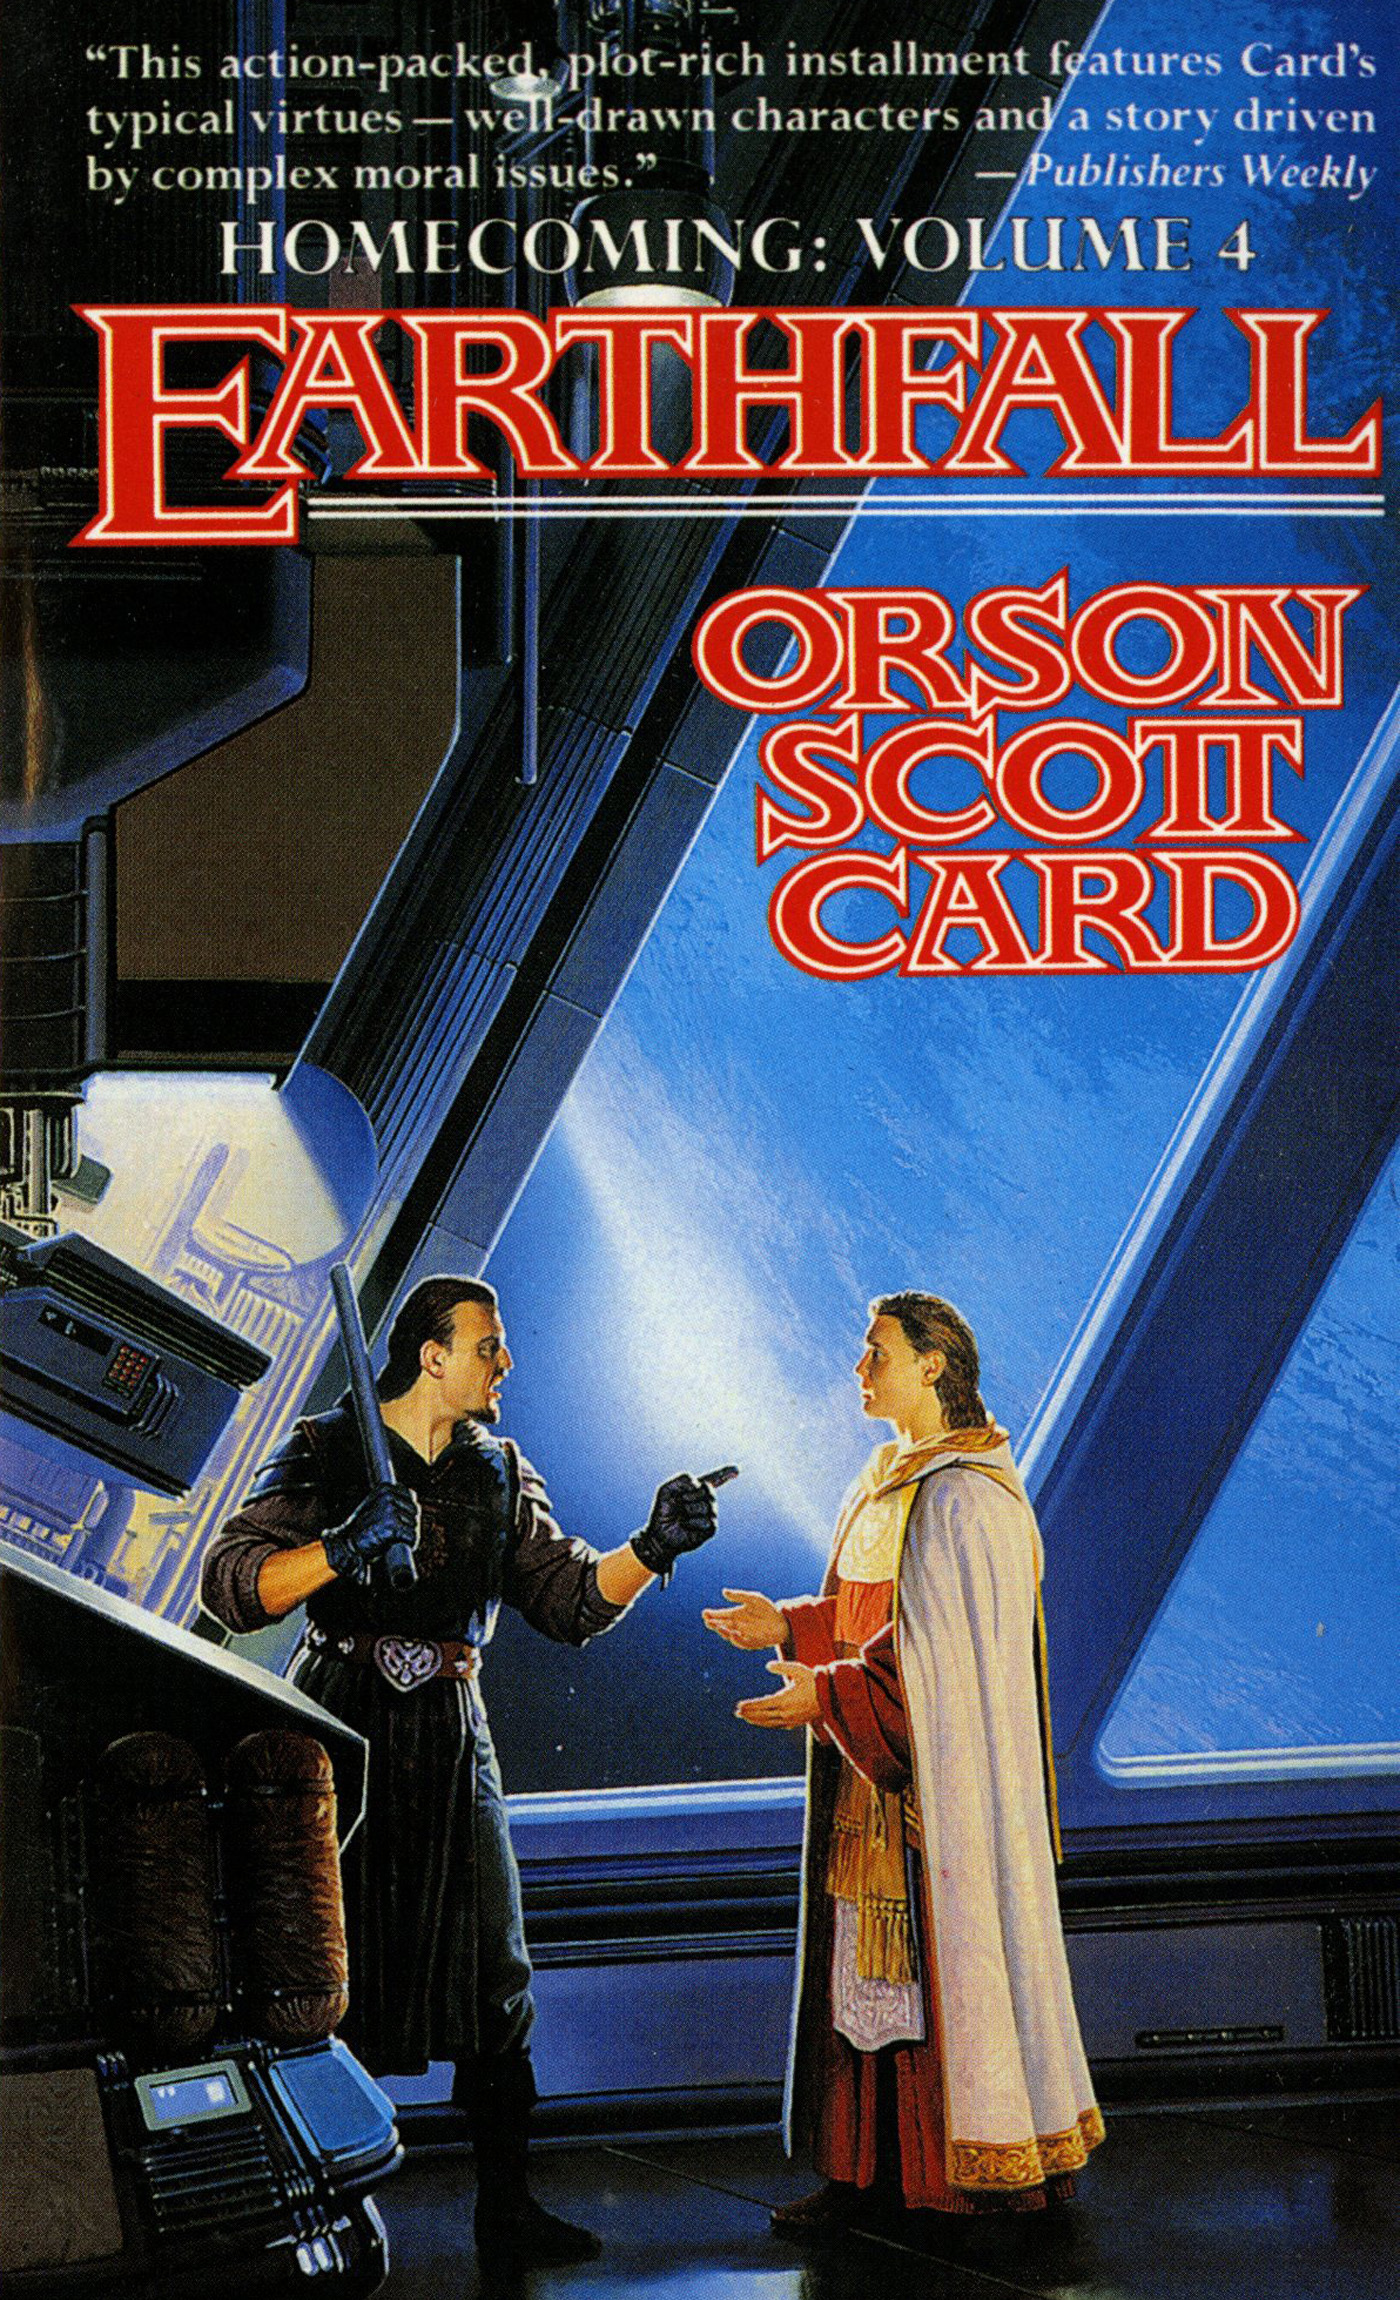 Earthfall : Homecoming: Volume 4 by Orson Scott Card